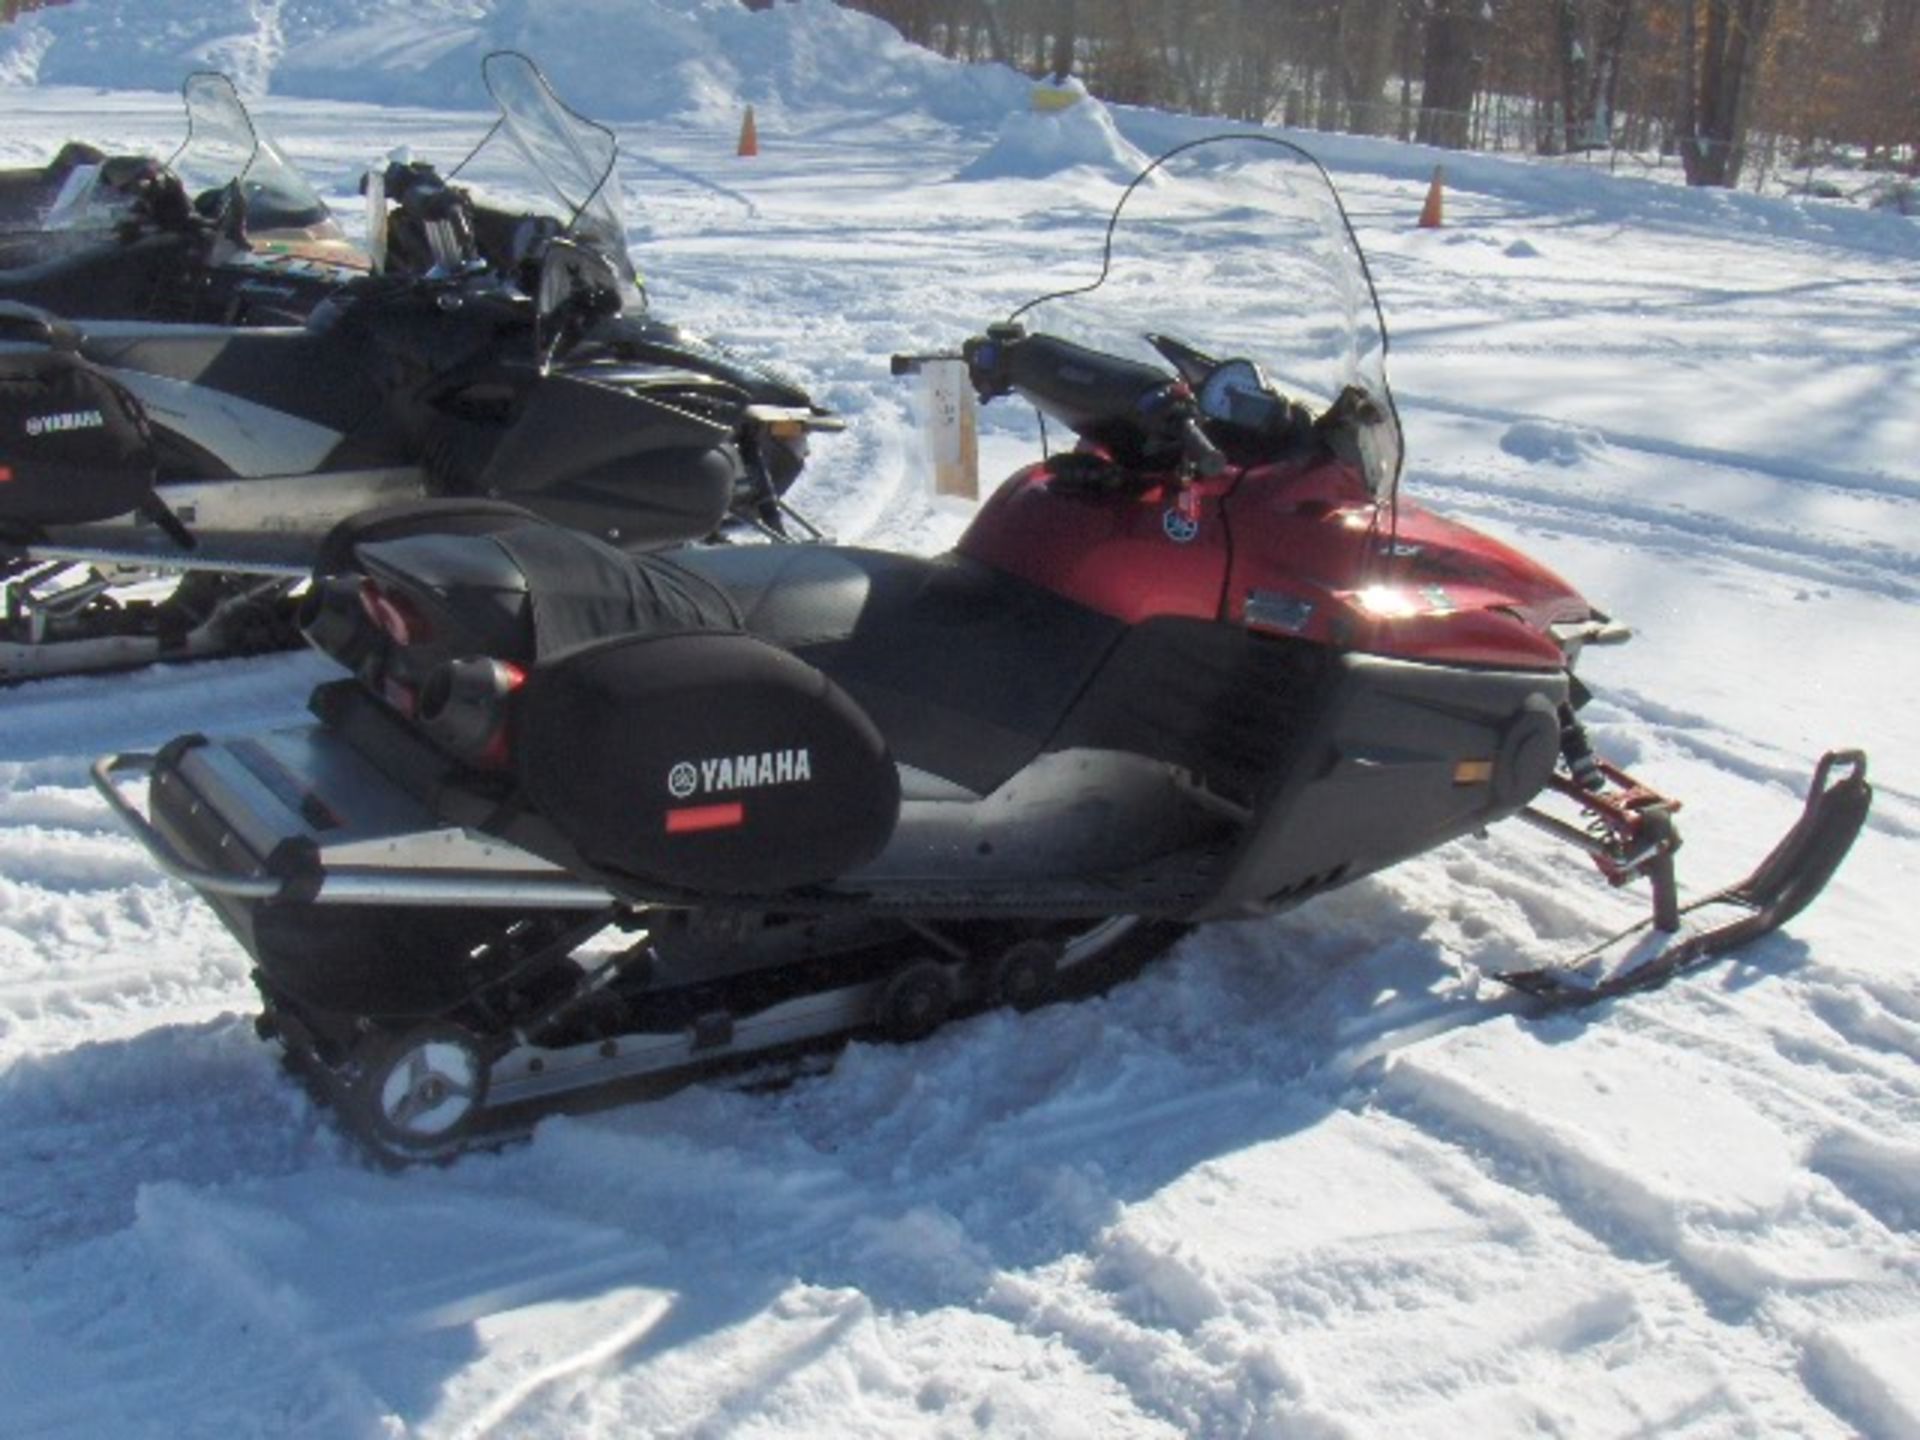 2005 YAMAHA 1100 RX WARRIOR  JYE8FX0045A001996 snowmobile, owner started at time of auction check - Image 3 of 4